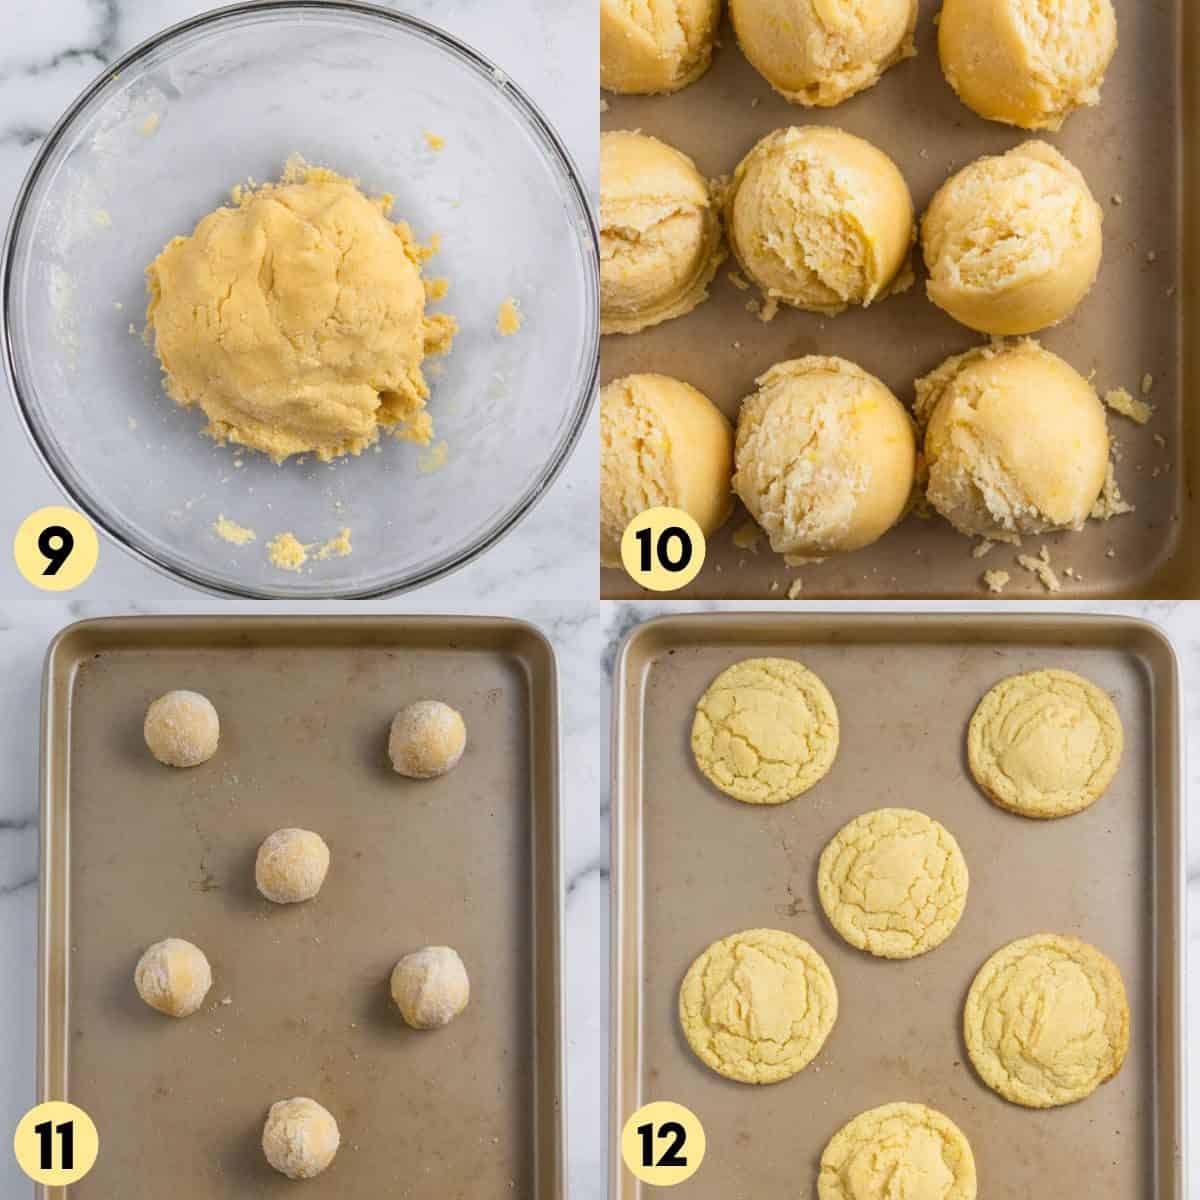 Sugar cookie dough in bowl, scooped on baking sheet and cooked.